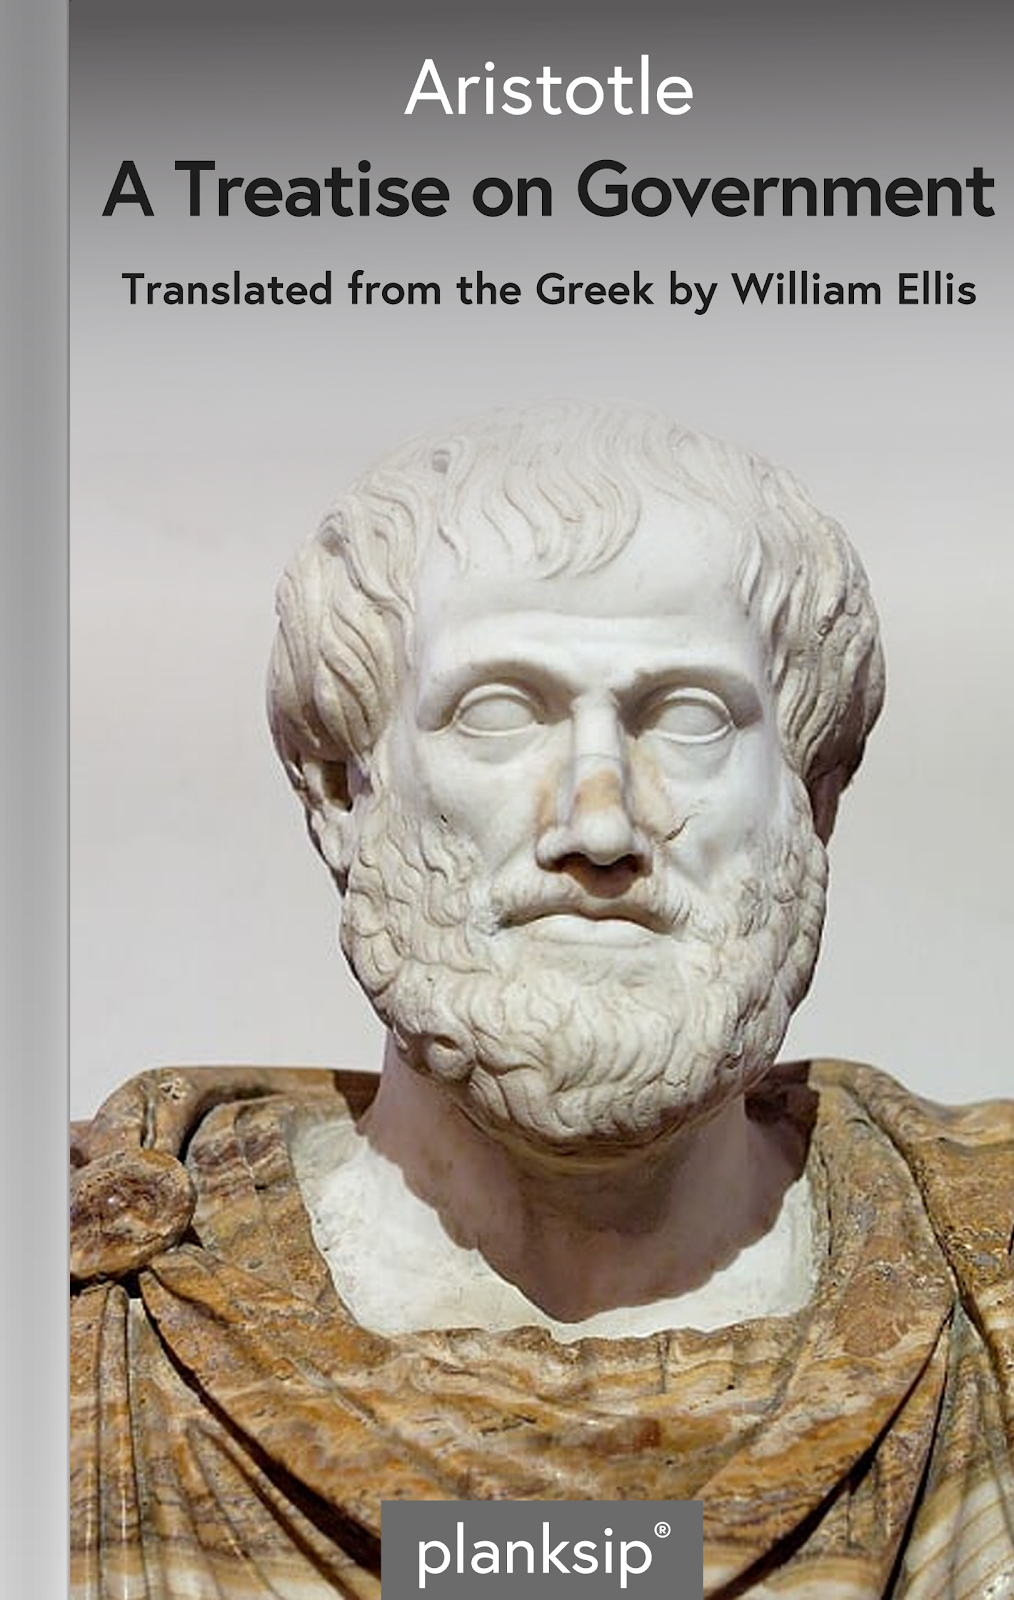 A Treatise on Government by Aristotle (384-322 B.C.). Published by planksip®